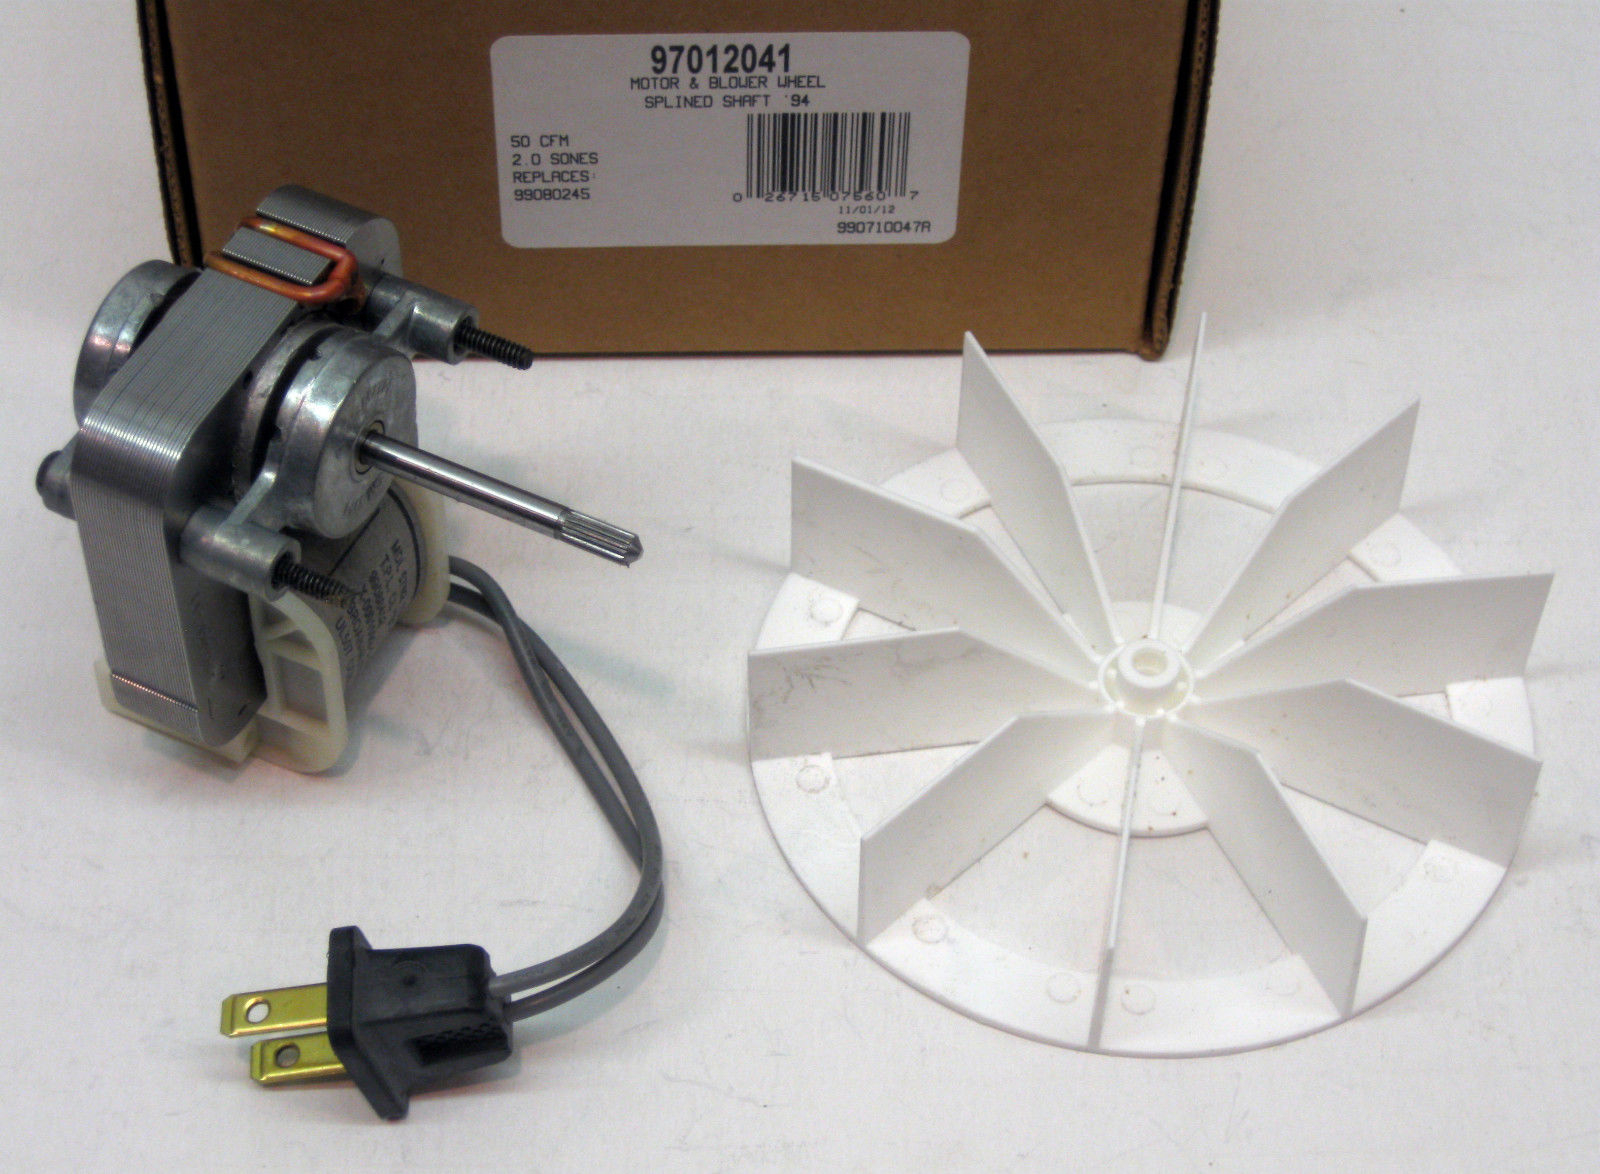 Broan Bathroom Fan Replacement Motor Image Of Bathroom And within dimensions 1600 X 1174